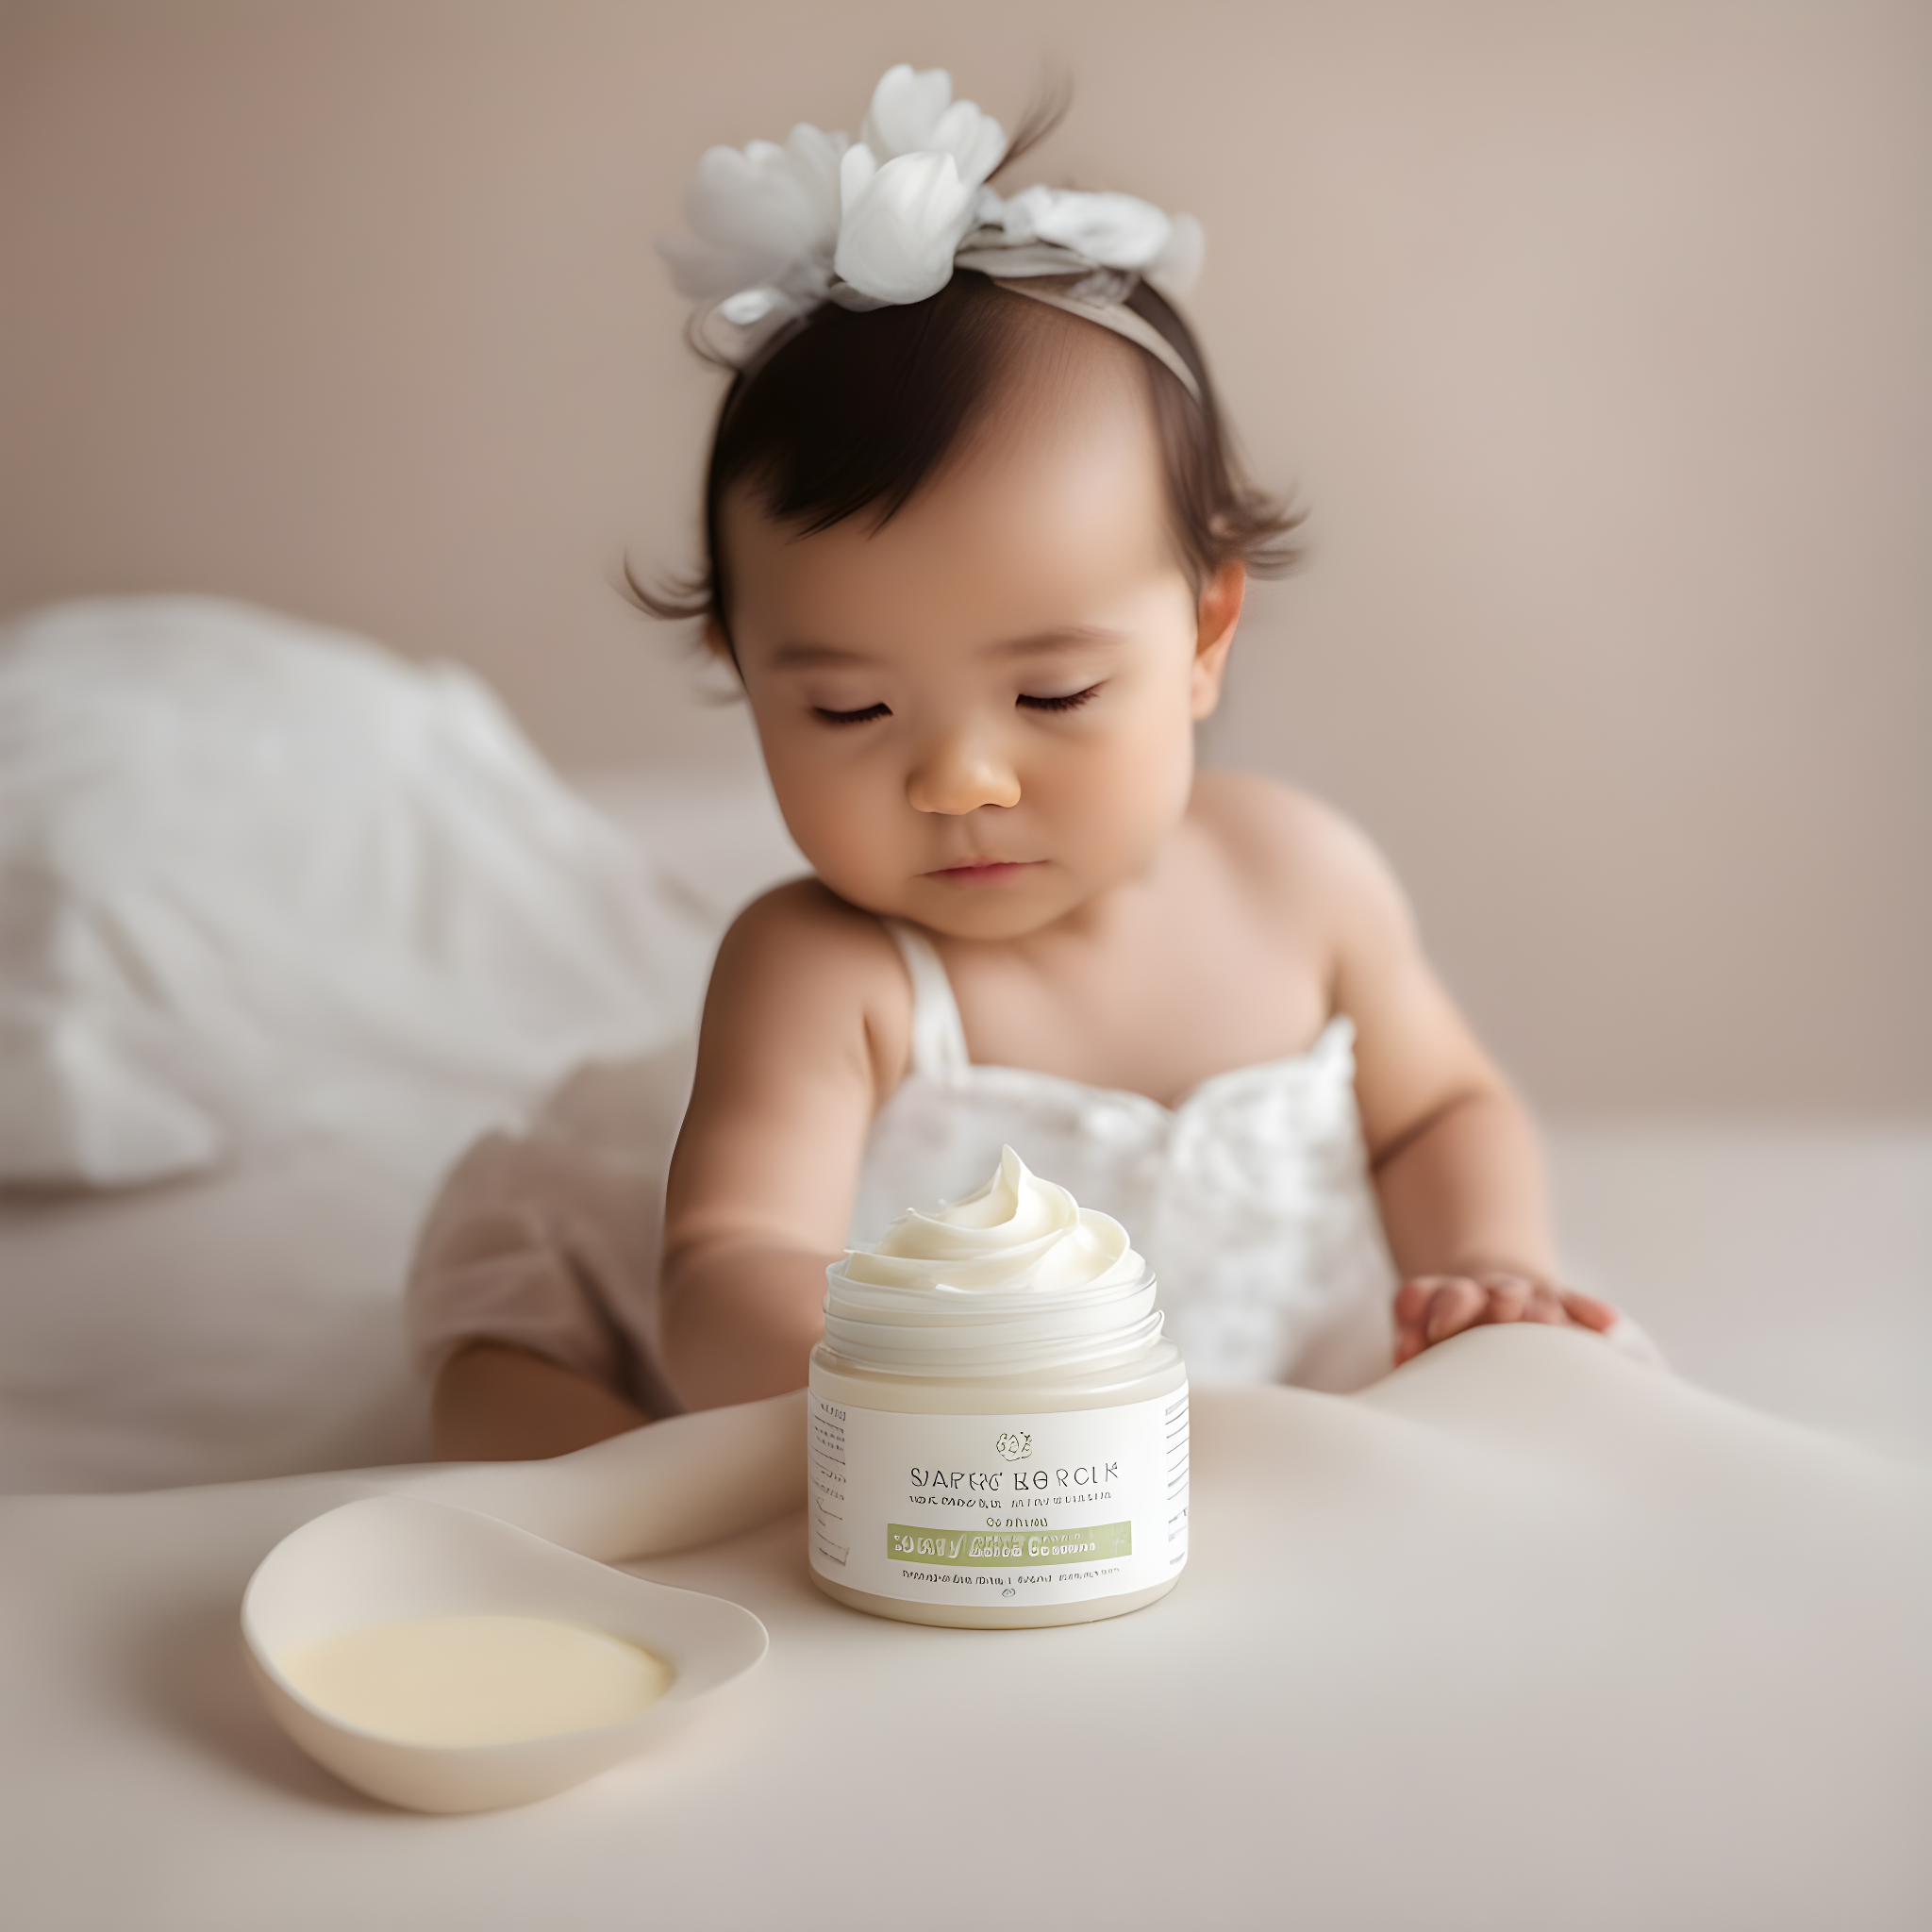 How to Care for Your Baby's Skin?